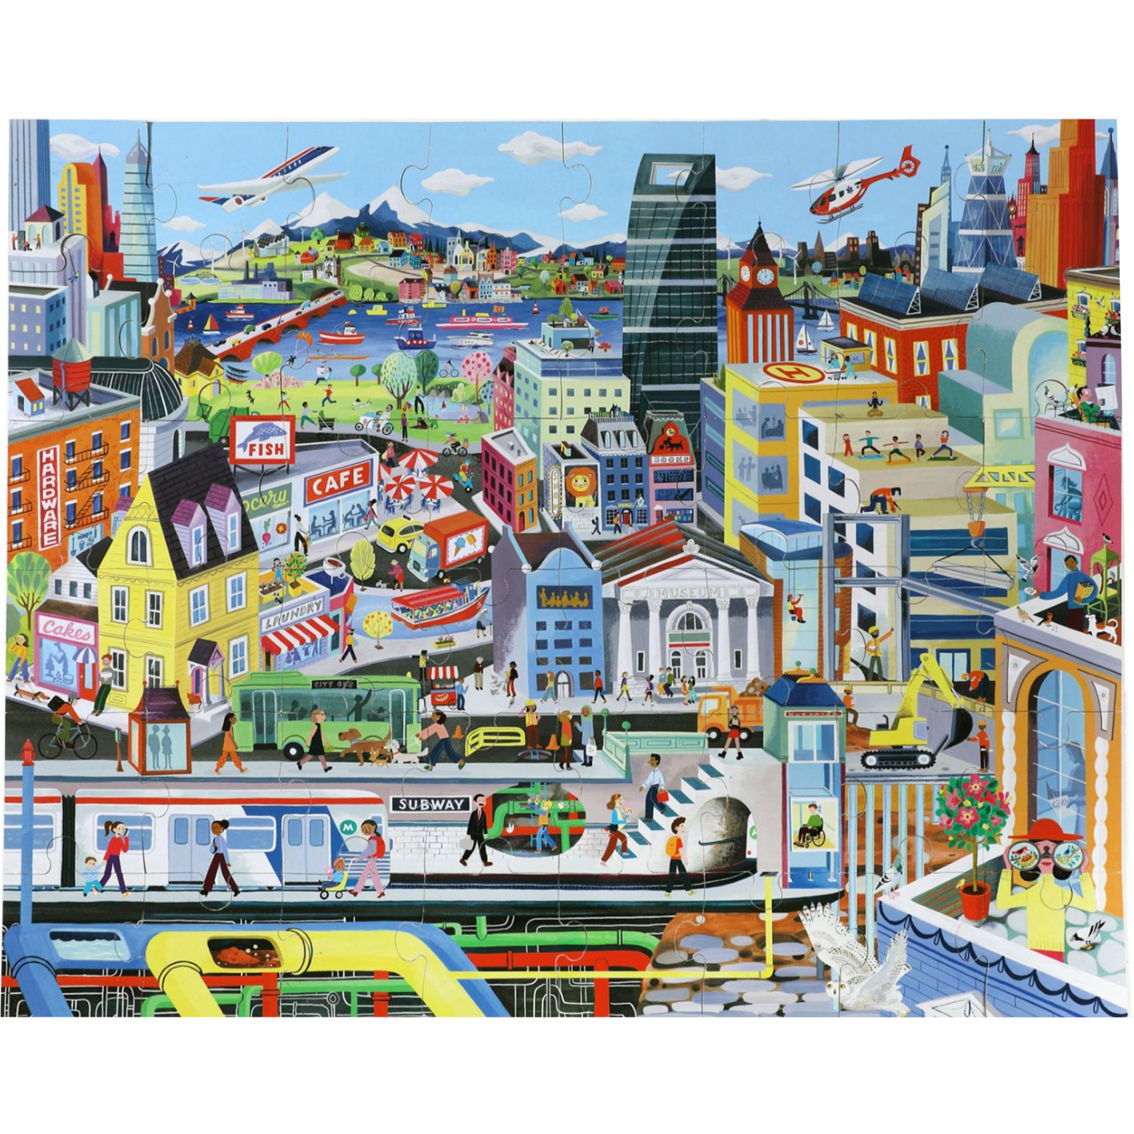 eeBoo Within the City 48 Piece Giant Floor Jigsaw Puzzle - Image 3 of 4